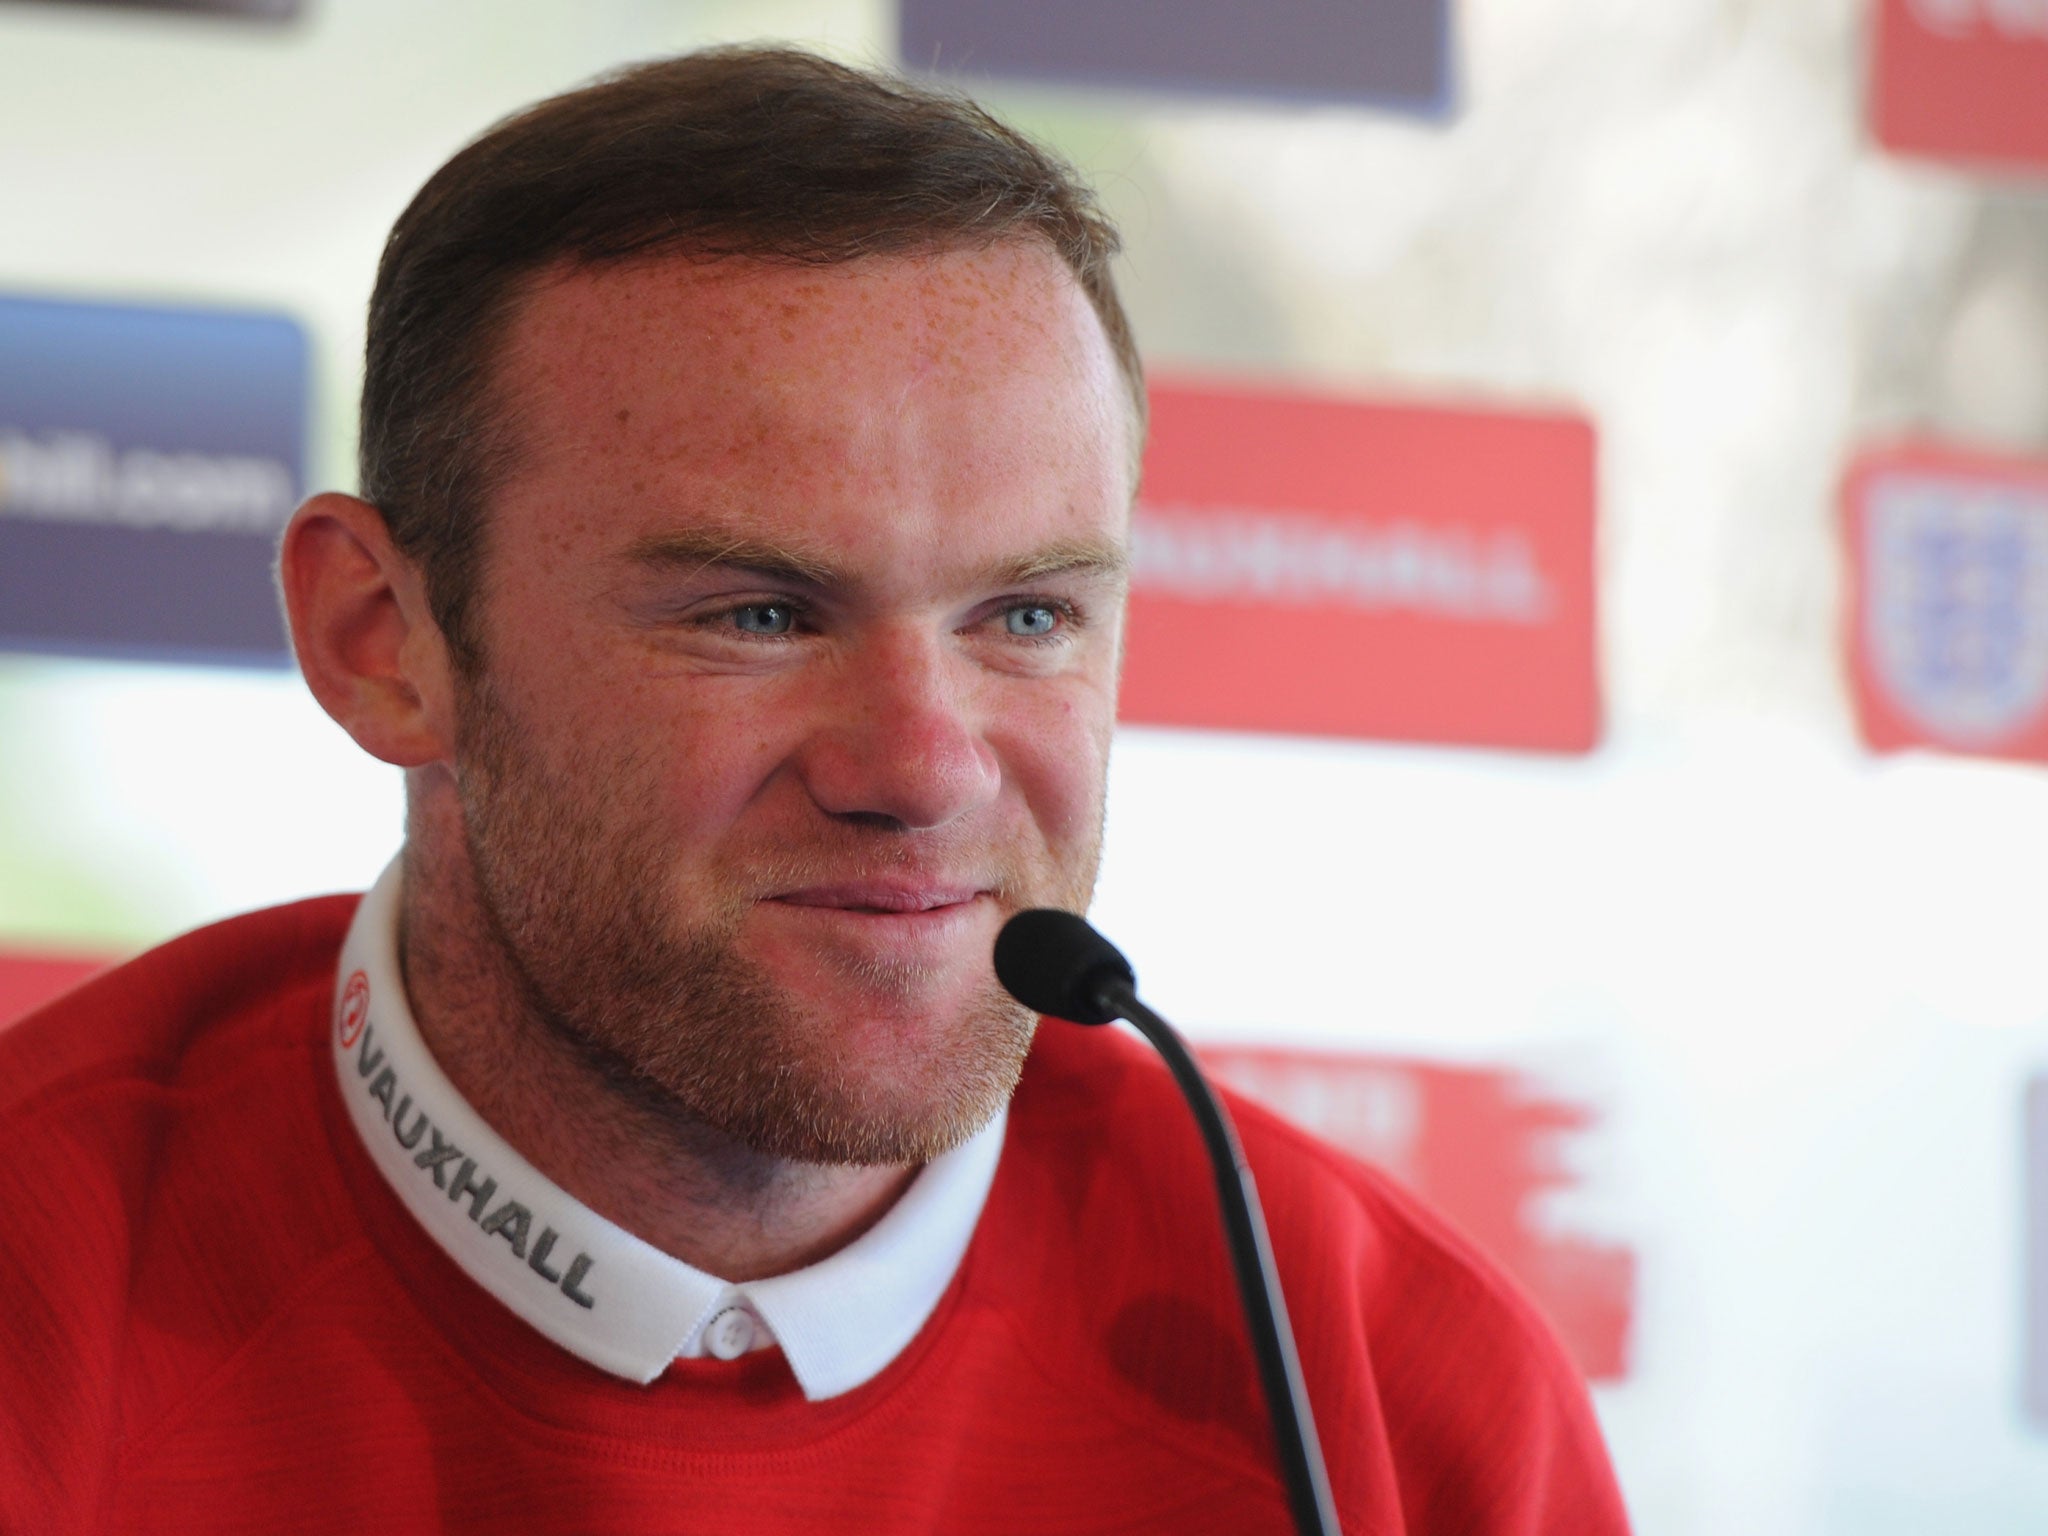 Wayne Rooney addresses the media at England's training camp in Portugal